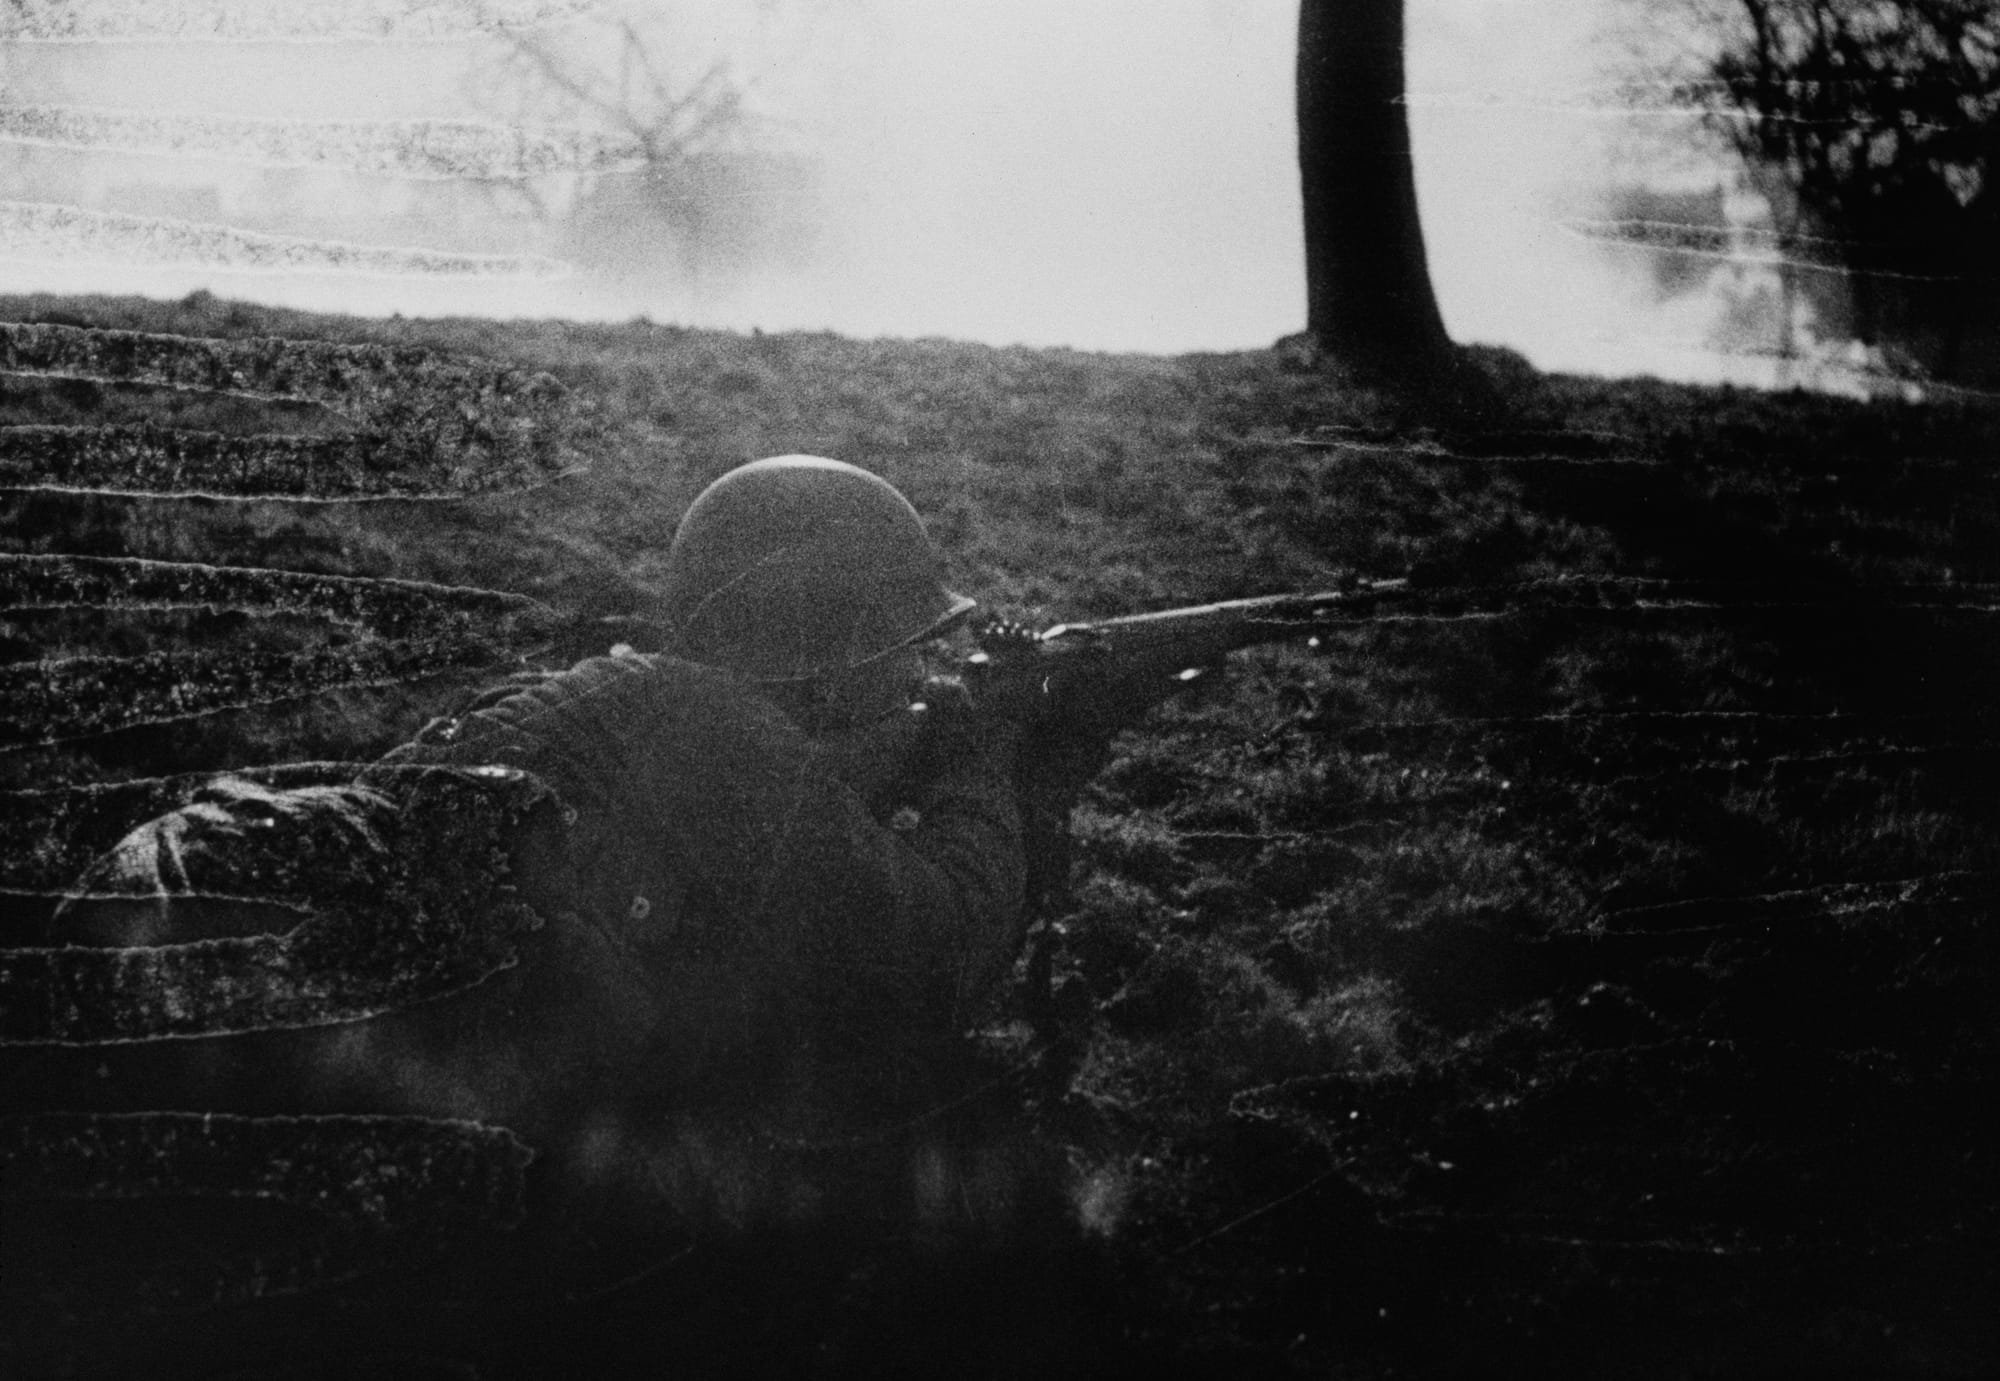 Tony Vaccaro - An American GI lines up a shot during the battle on the Rhineland Valley 1945